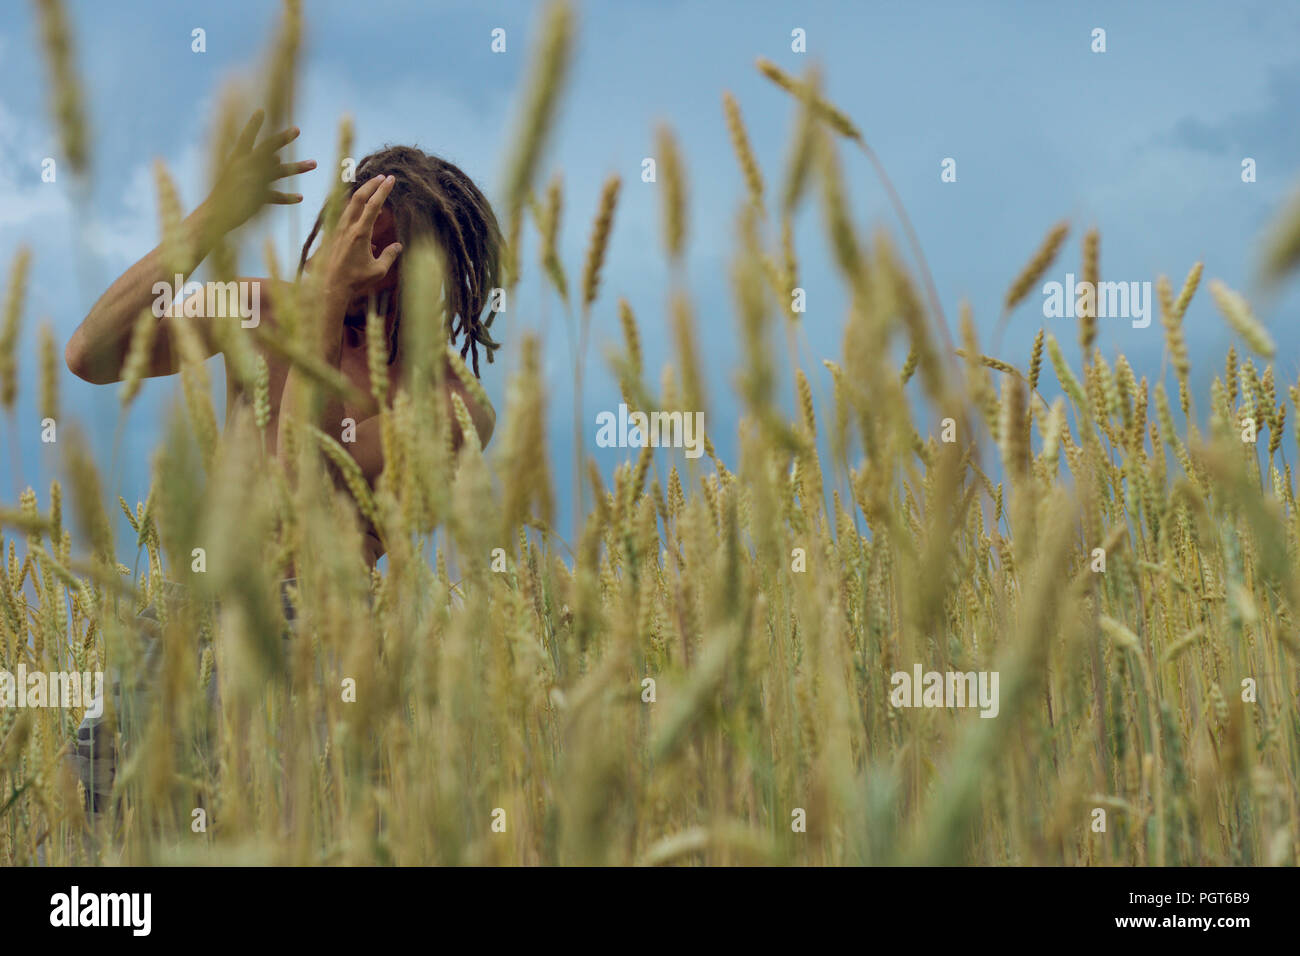 Man in wheat field, human in nature with summer sun, grass and plants Stock Photo